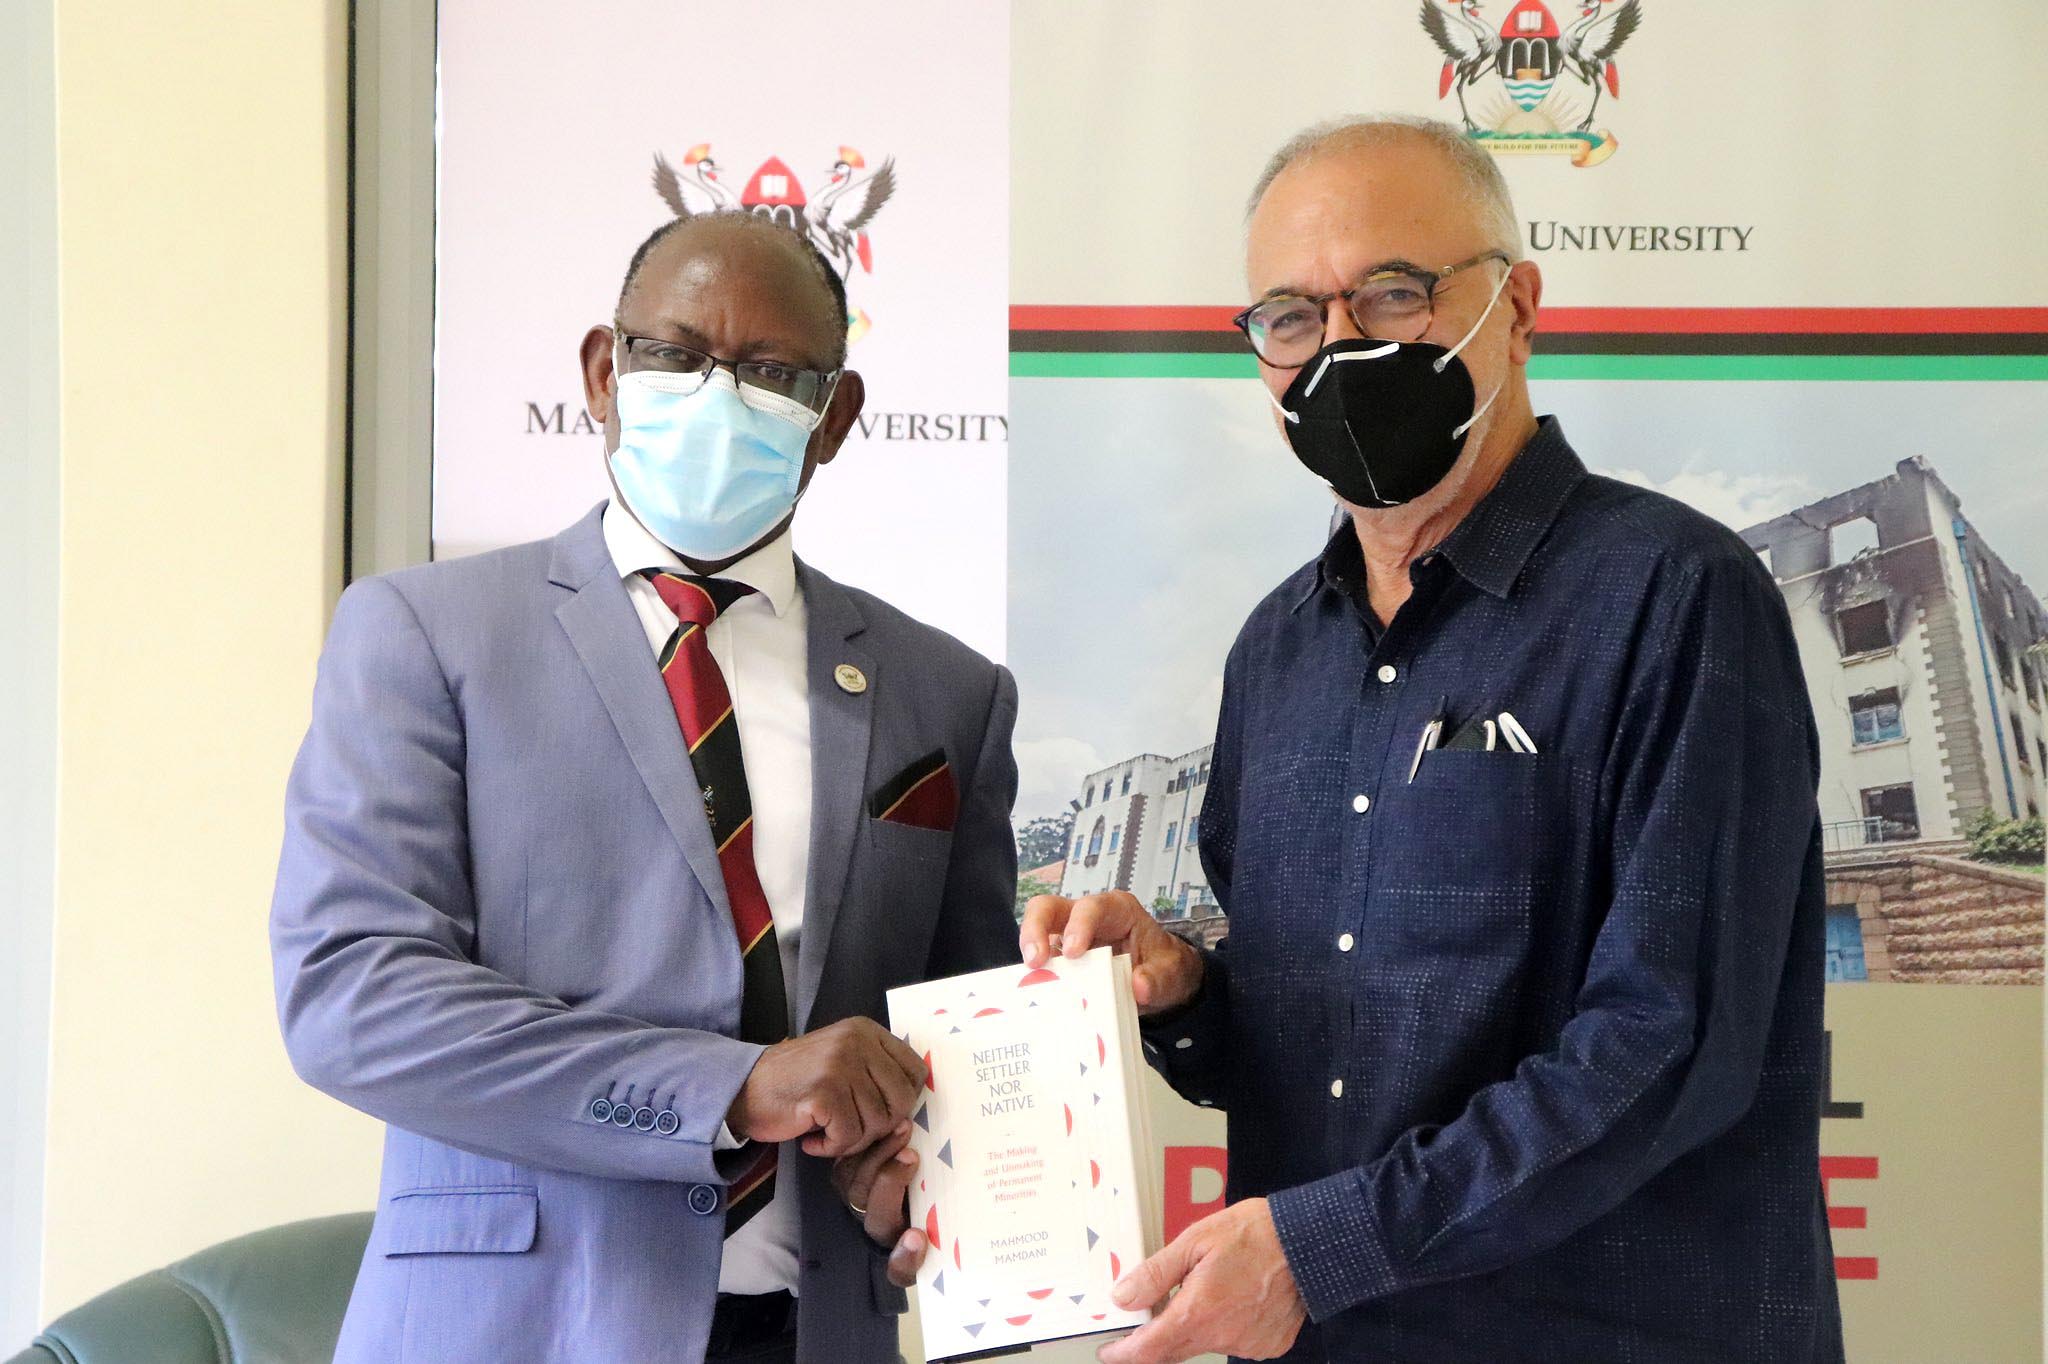 The Vice Chancellor, Prof. Barnabas Nawangwe (L) receives a copy of the book - Neither Settler nor Native: The Making and Unmaking of Permanent Minorities - from Prof. Mahmood Mamdani (R) on 1st April 2021, CTF1, Makerere University.